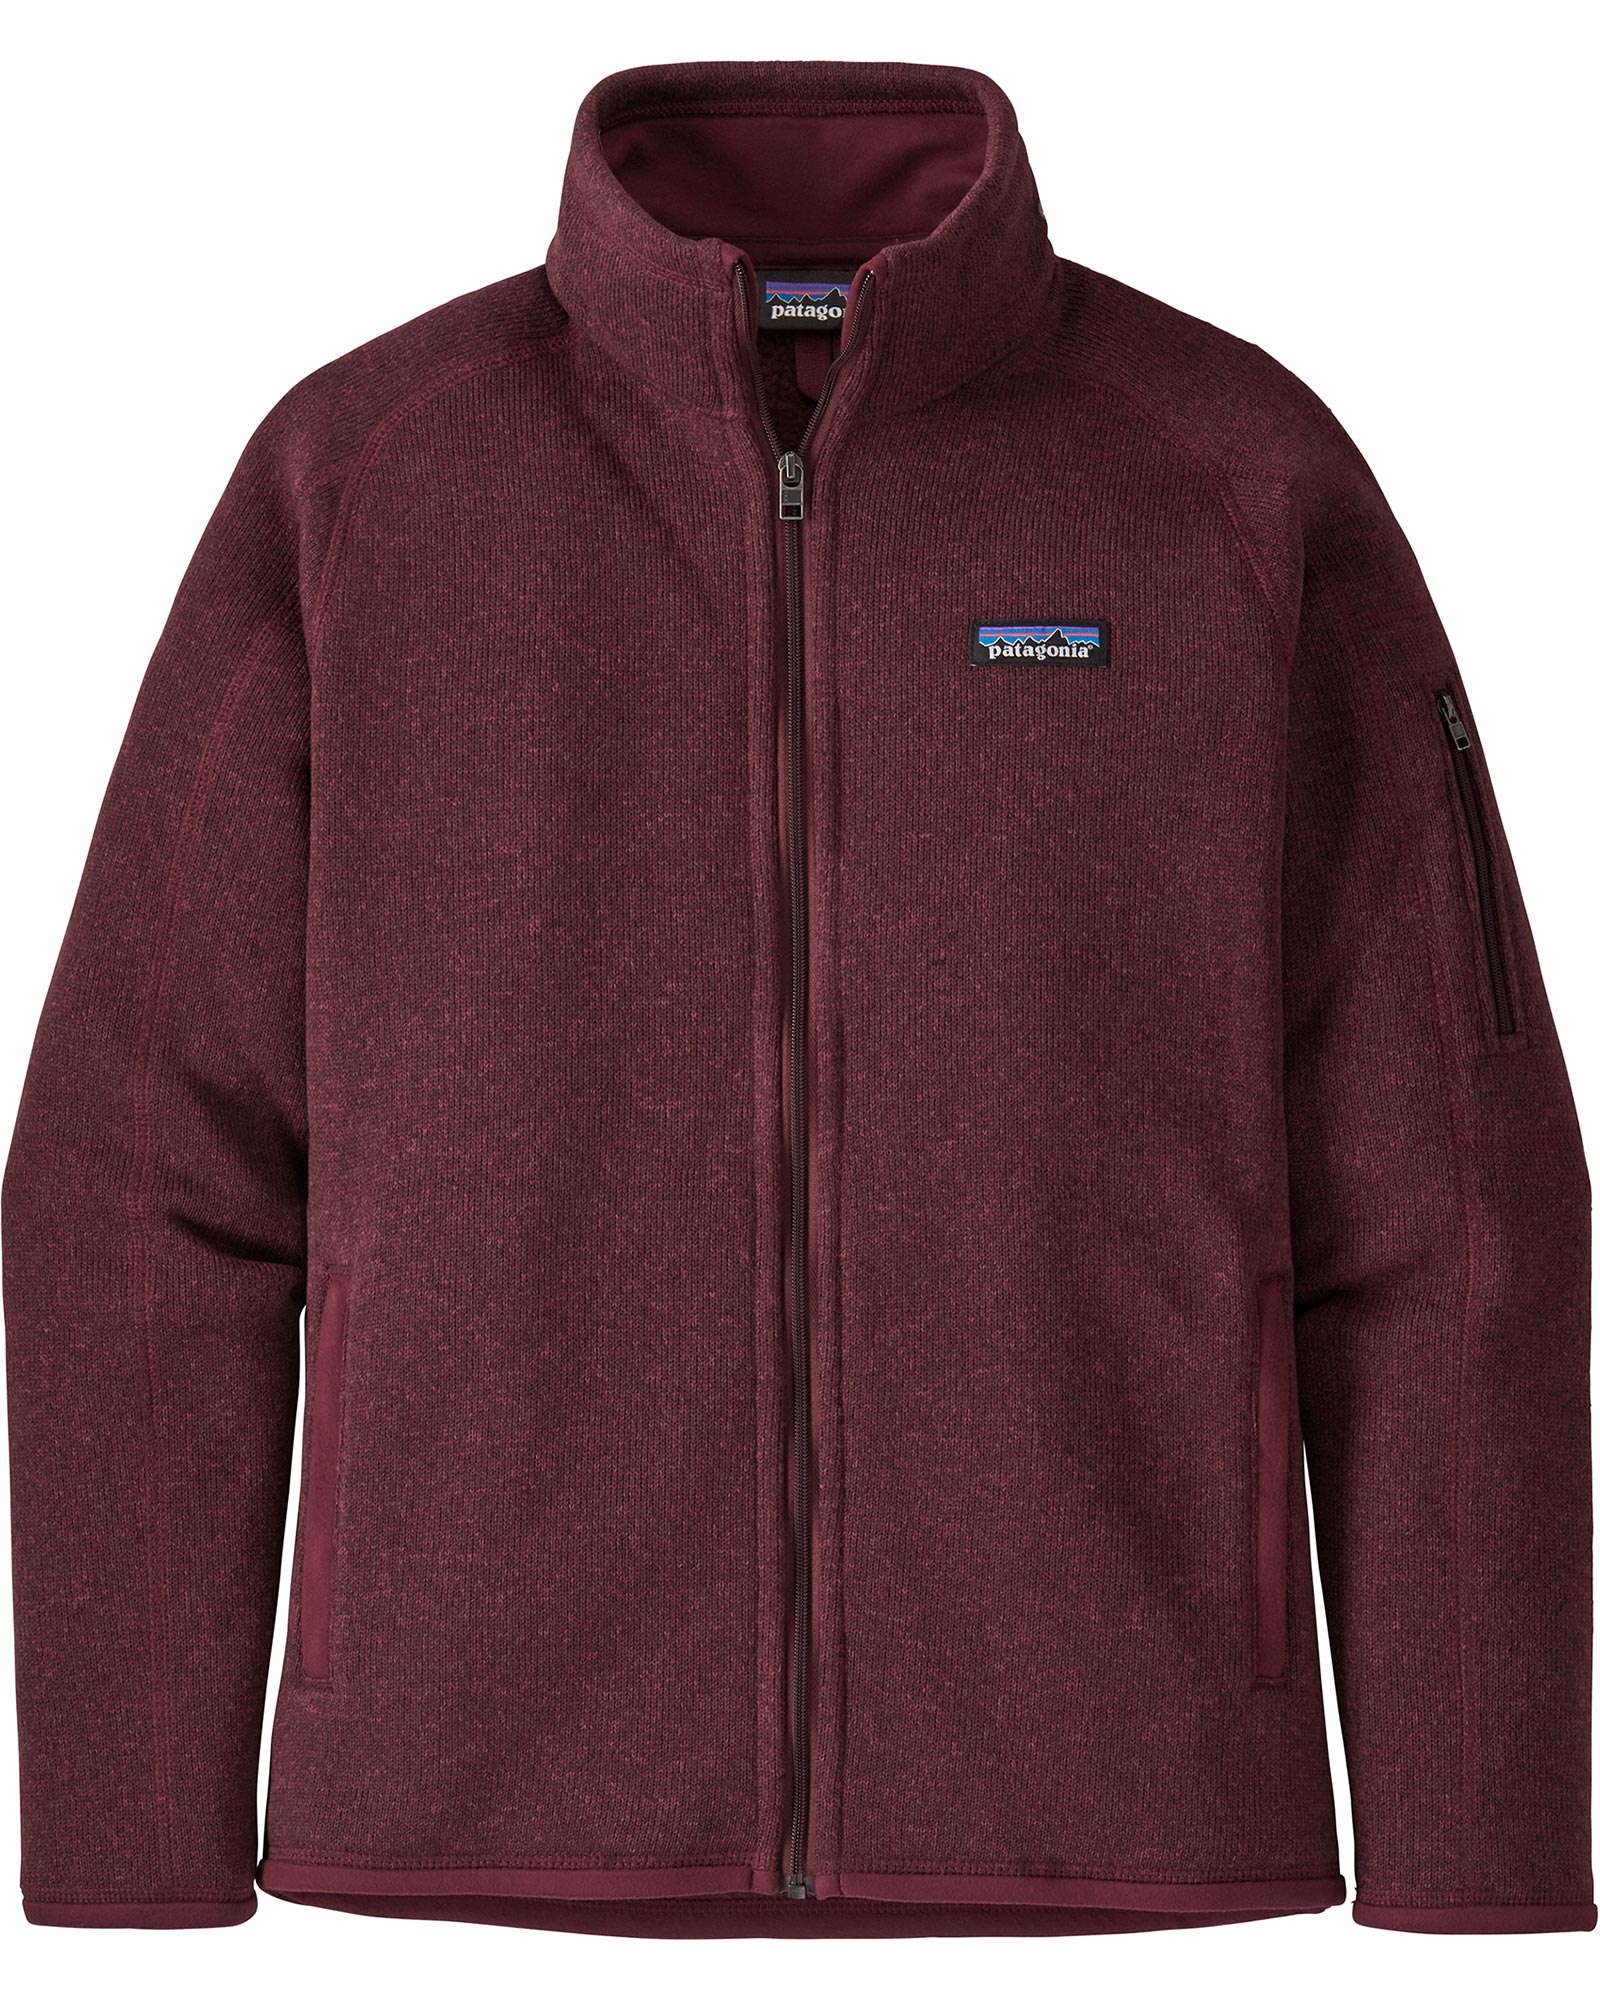 Patagonia Better Sweater Women’s Jacket - Chicory Red S